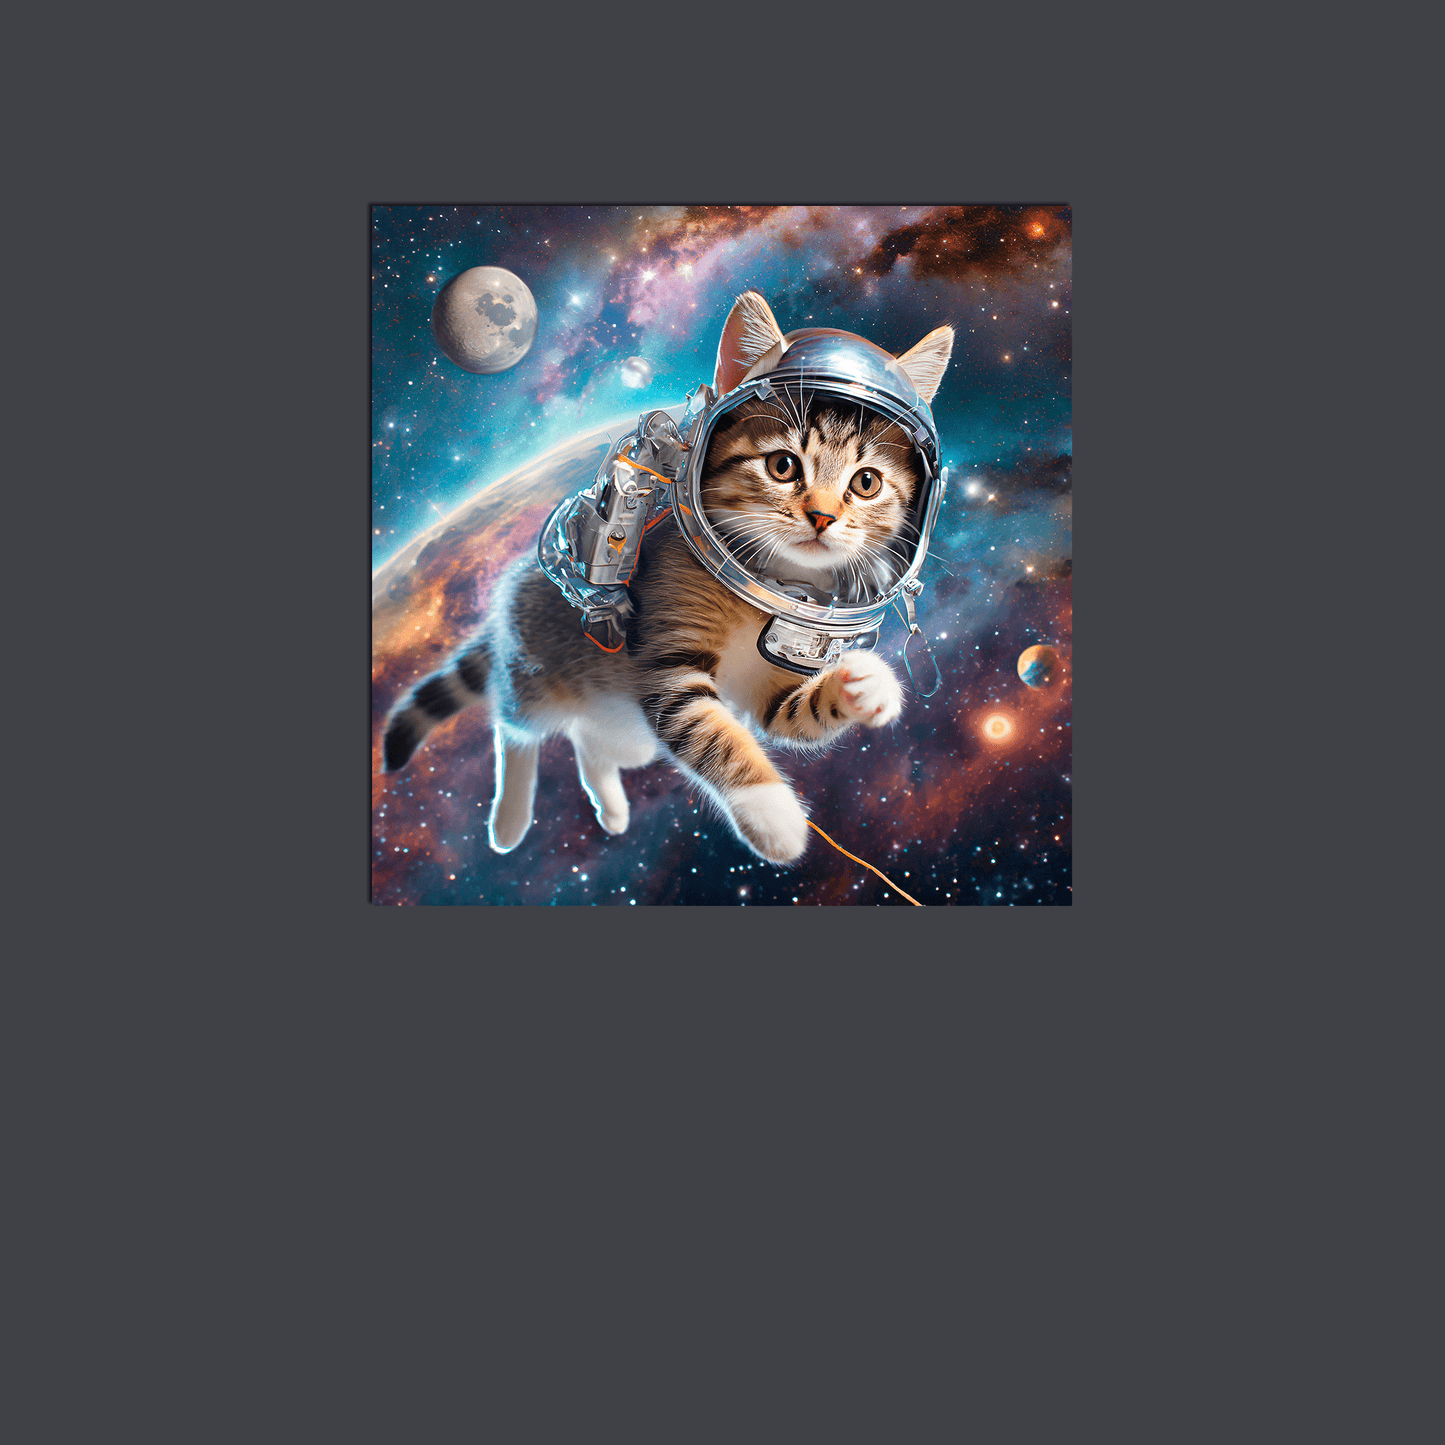 Space Kitty Chasing Cosmic String - Canvas Wrap - Premium Canvas Print